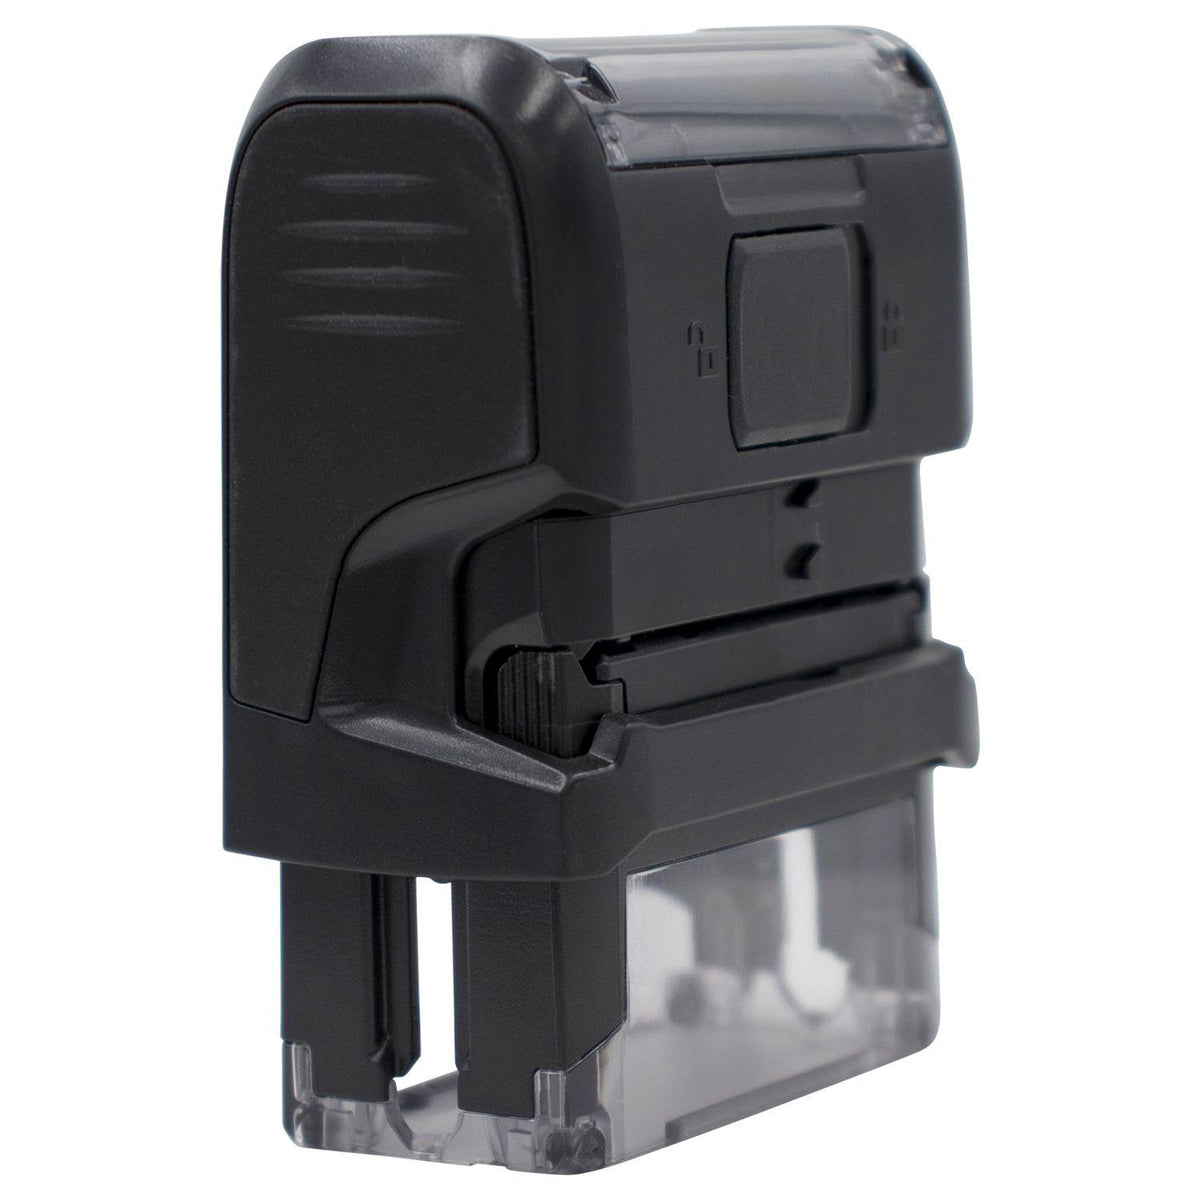 Self-Inking Avis De Receiption Stamp - Engineer Seal Stamps - Brand_Trodat, Impression Size_Small, Stamp Type_Self-Inking Stamp, Type of Use_Office